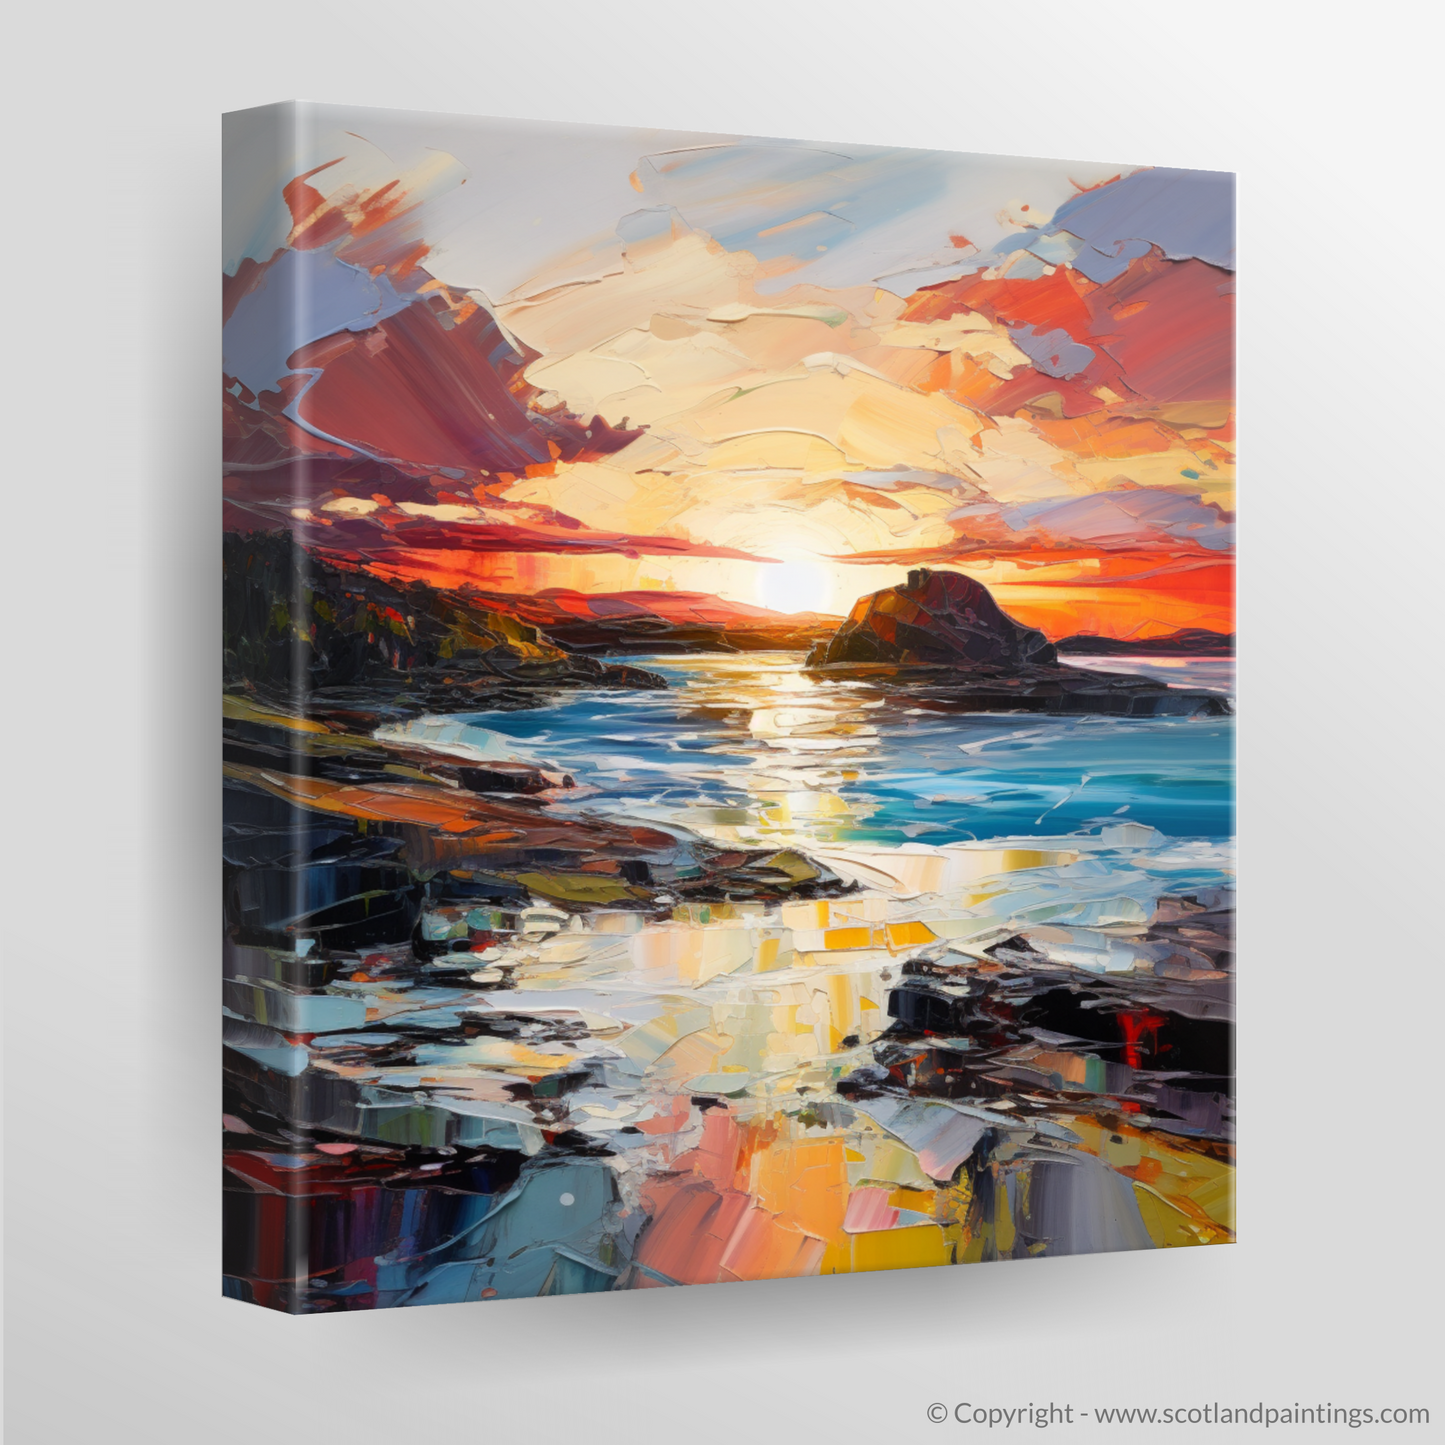 Painting and Art Print of Catterline Bay at golden hour. Golden Hour Majesty at Catterline Bay.